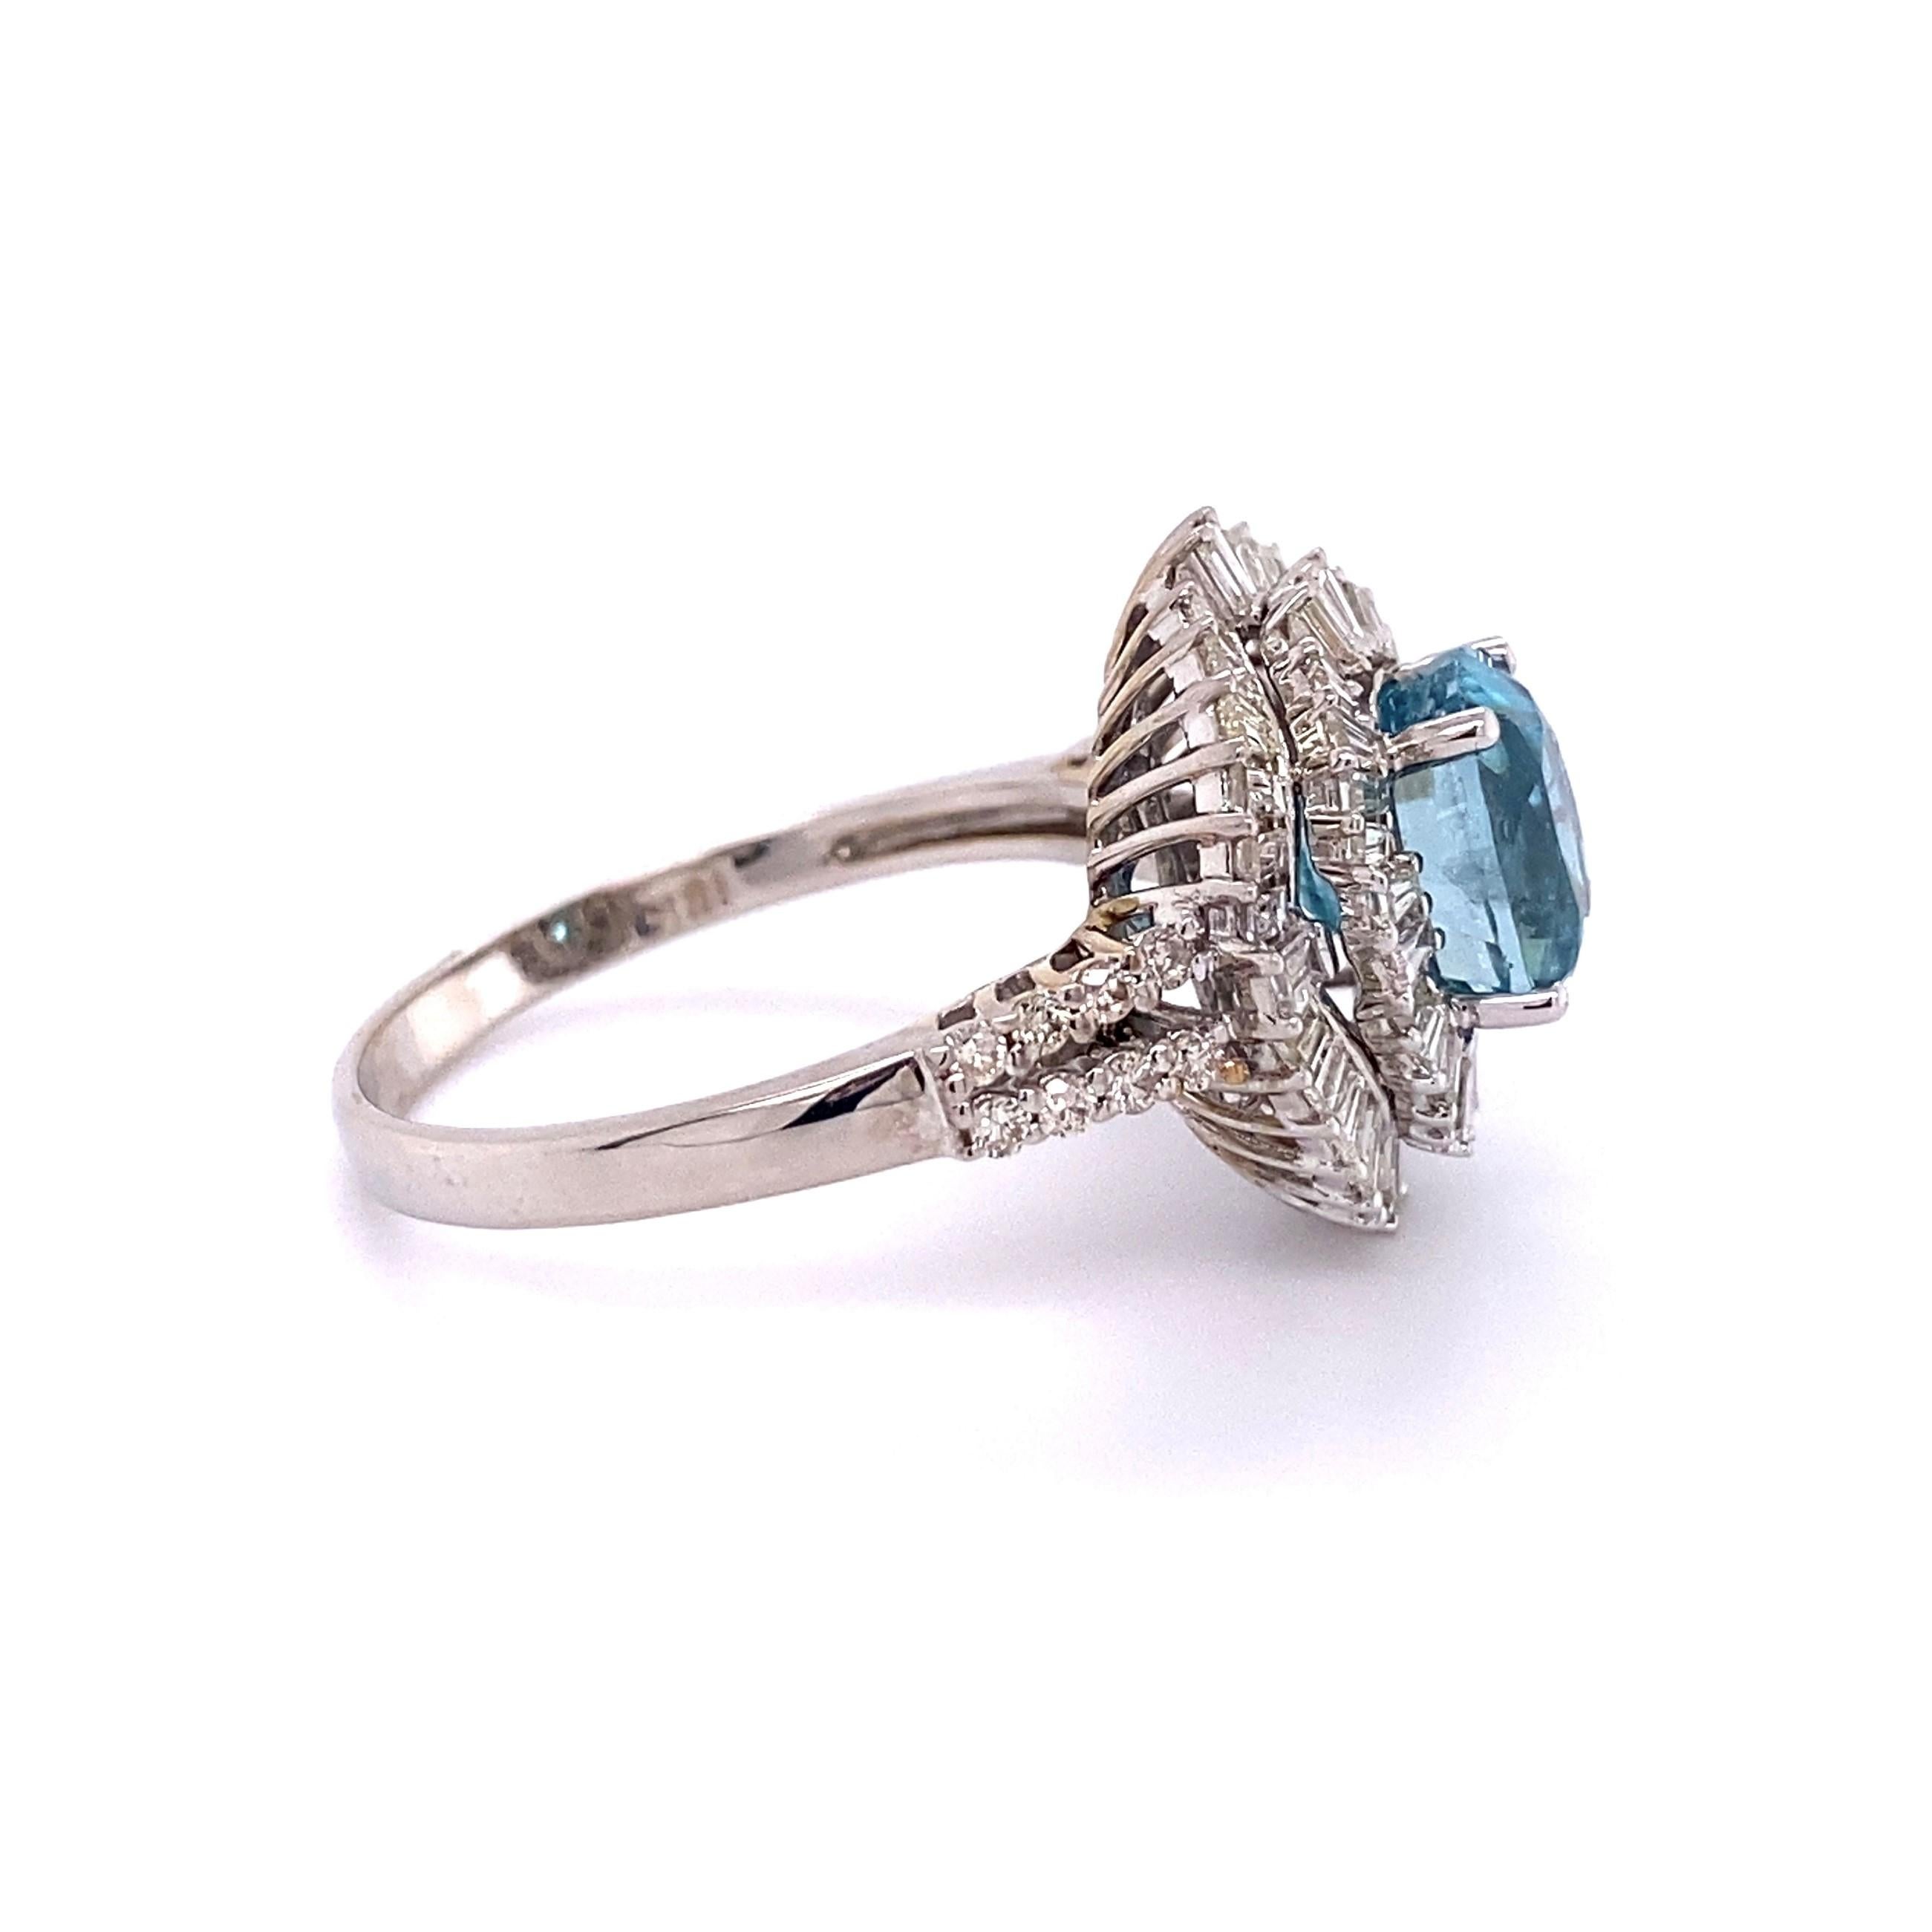 5.24 Carat Blue Zircon and Diamond Gold Cocktail Ring Estate Fine Jewelry In Excellent Condition For Sale In Montreal, QC